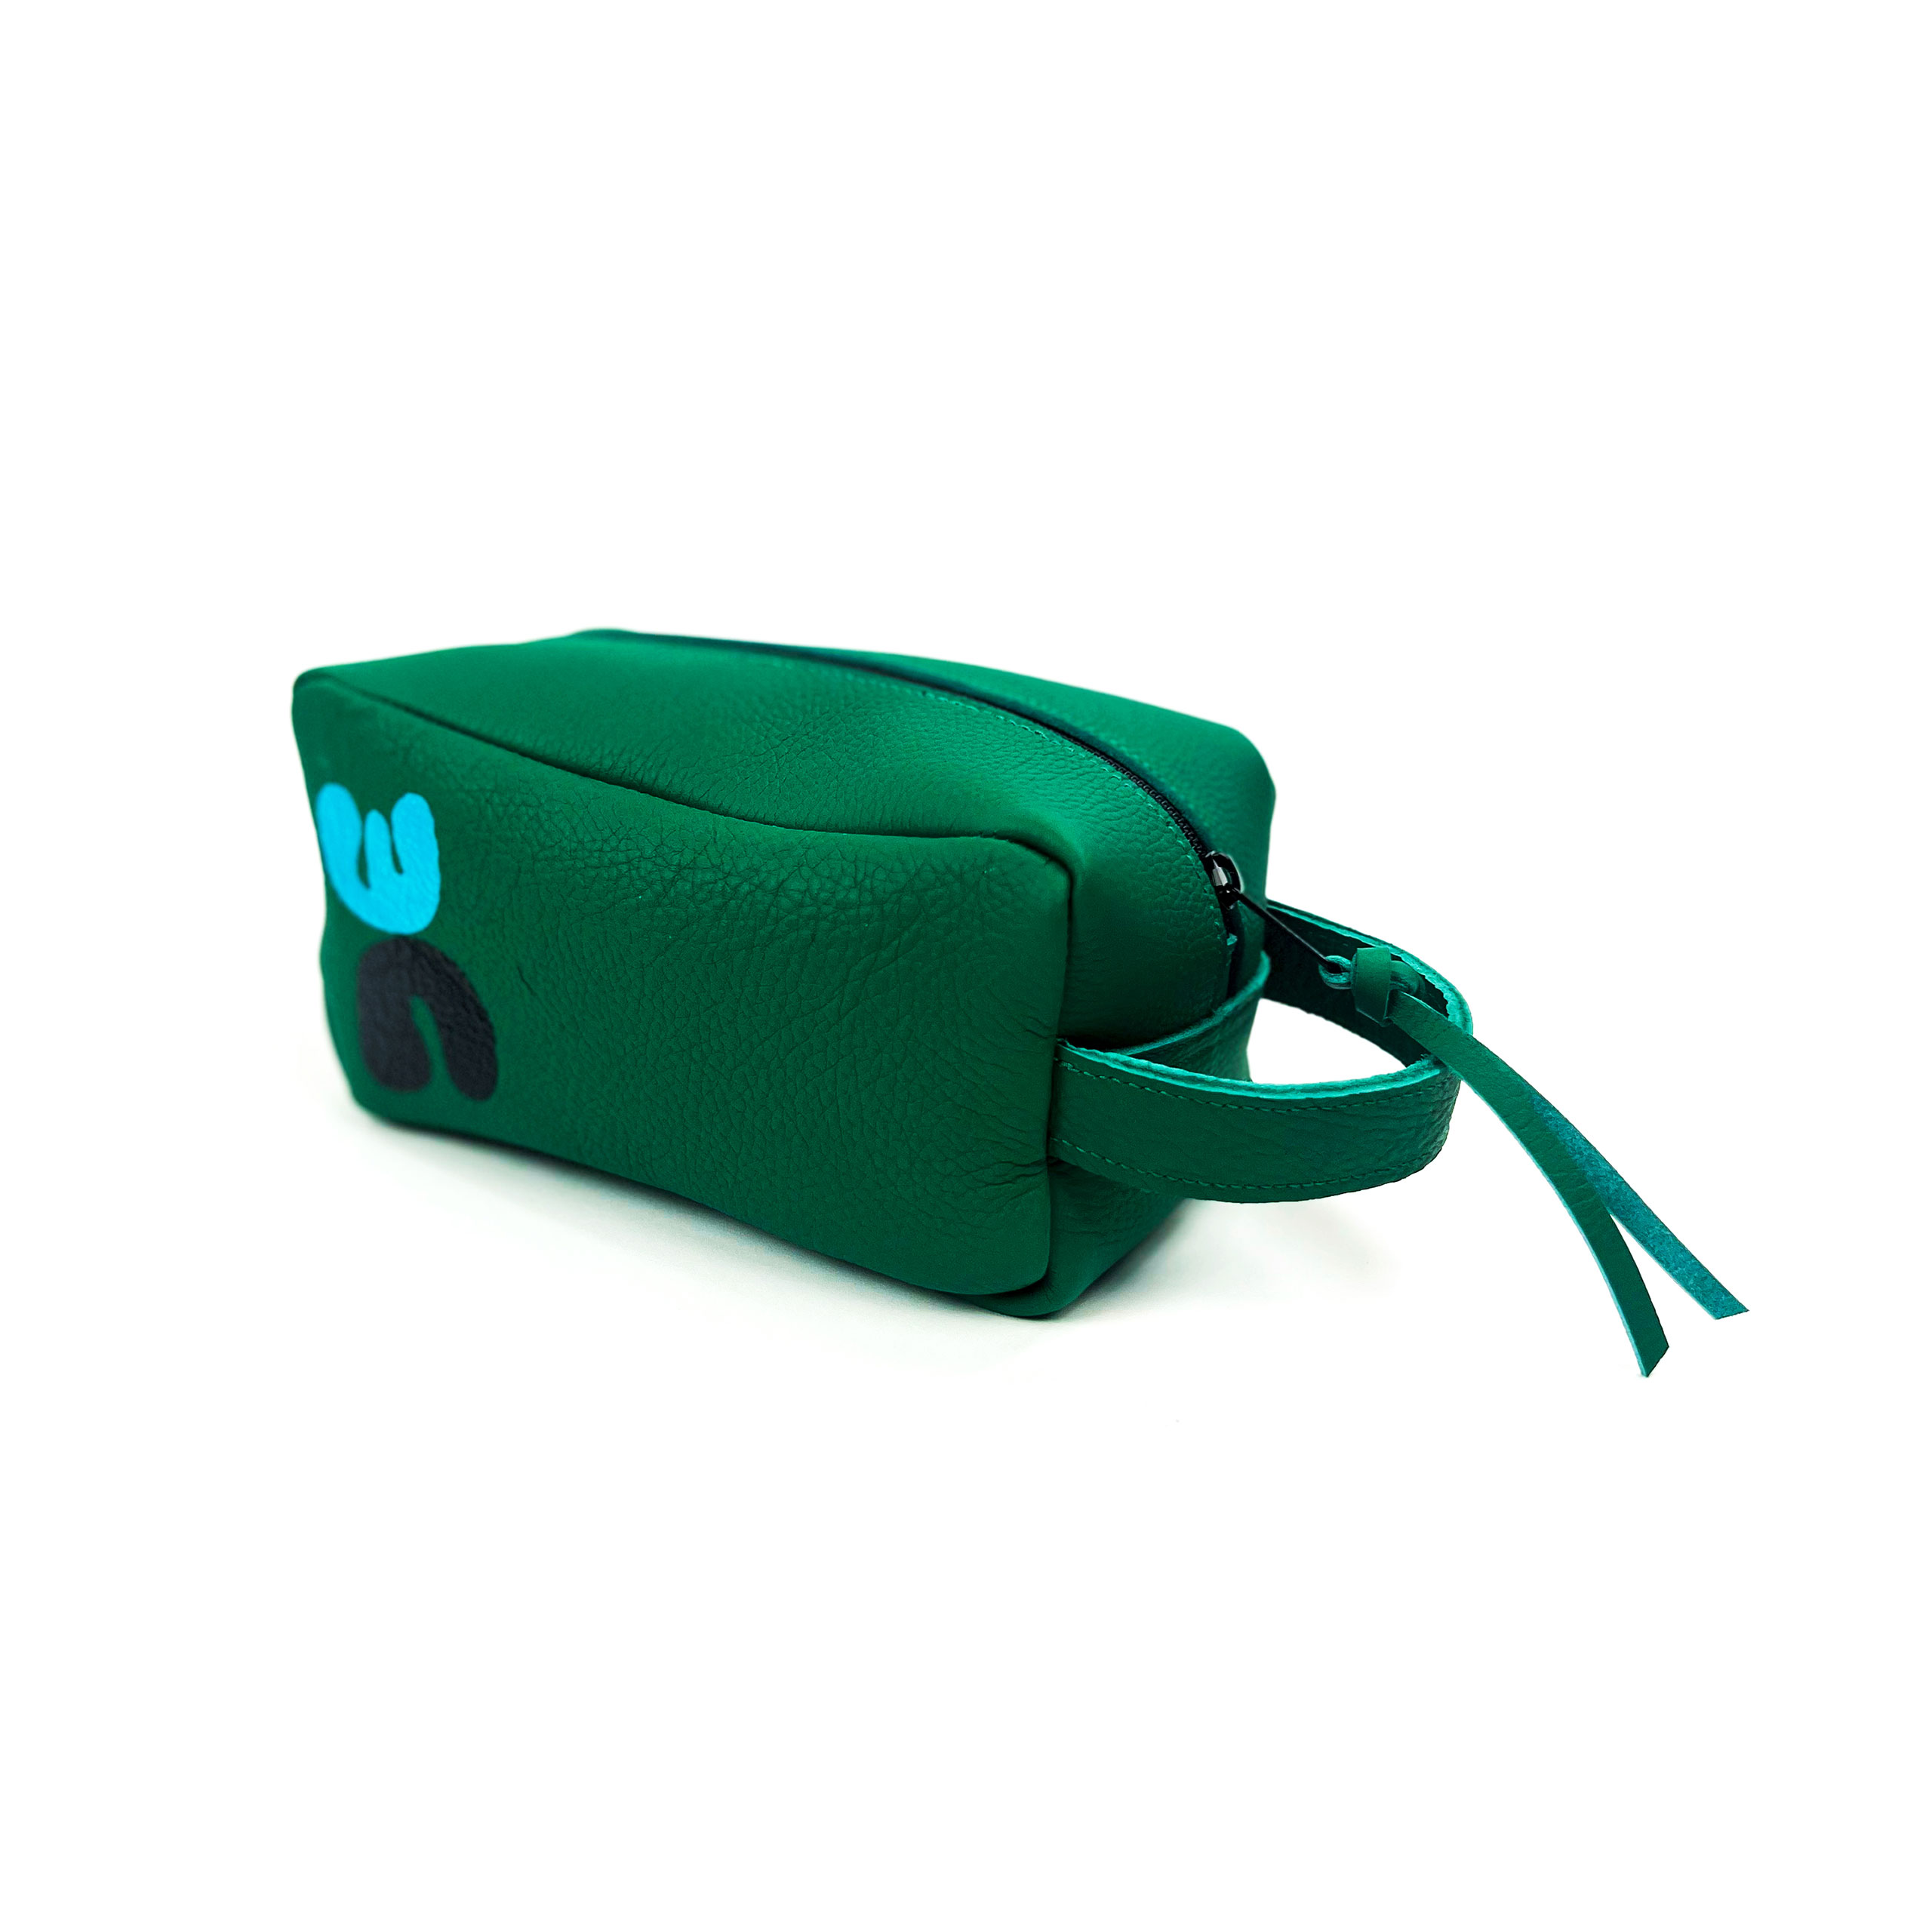 Green cosmetic bag with a blue handprint logo and text on the side, positioned against a white background.